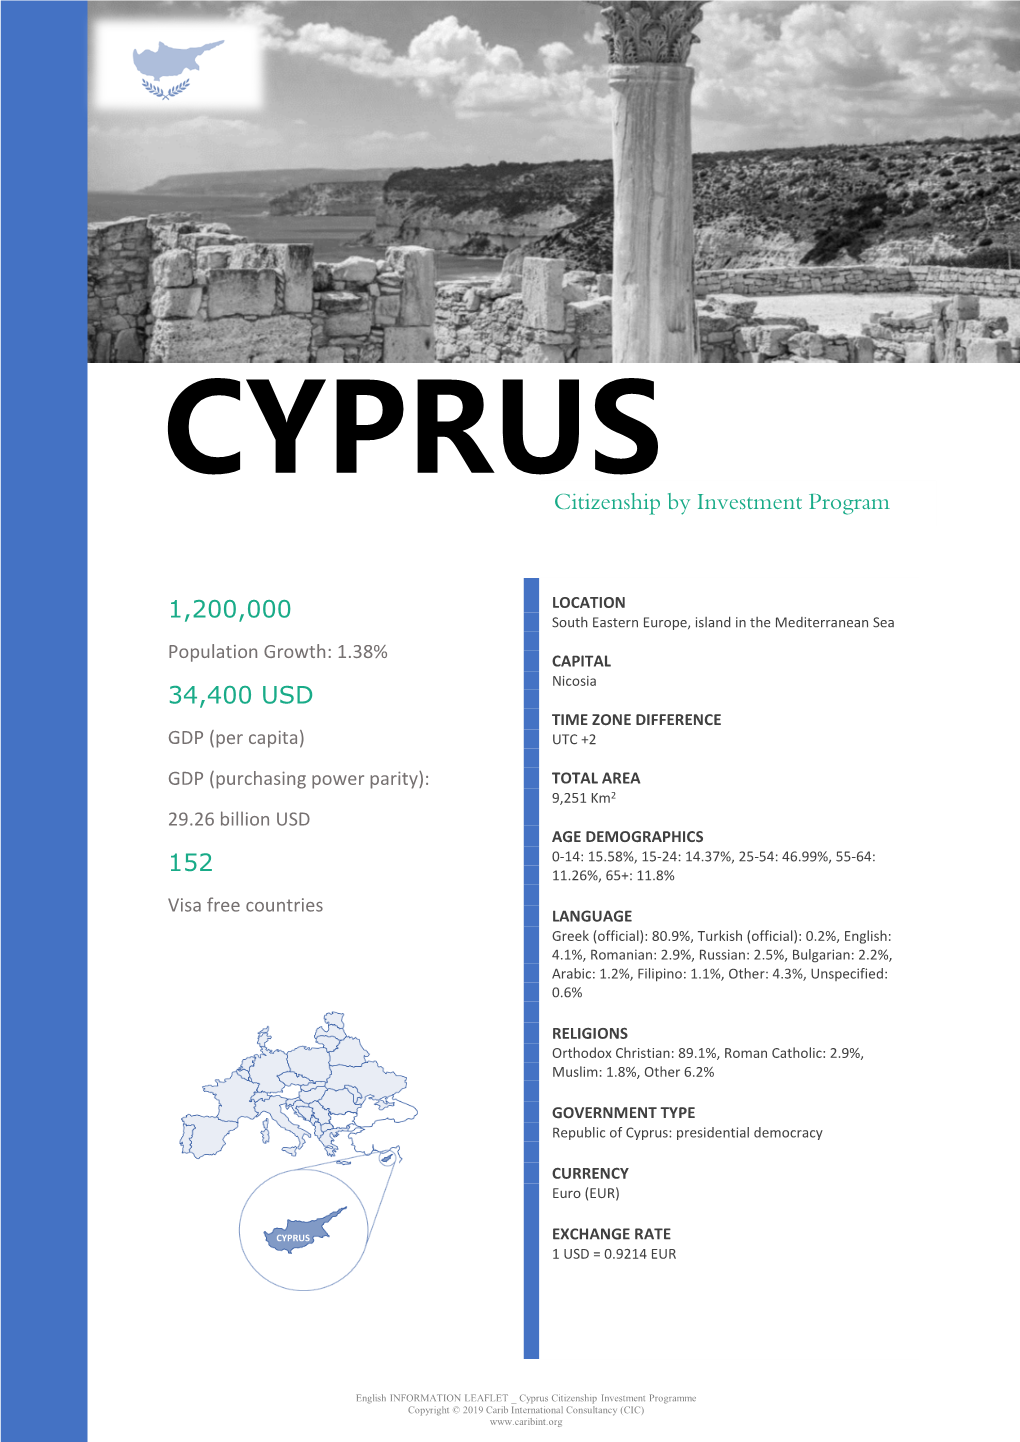 View the Detailed Leaflet for Cyprus Citizenship by Investment